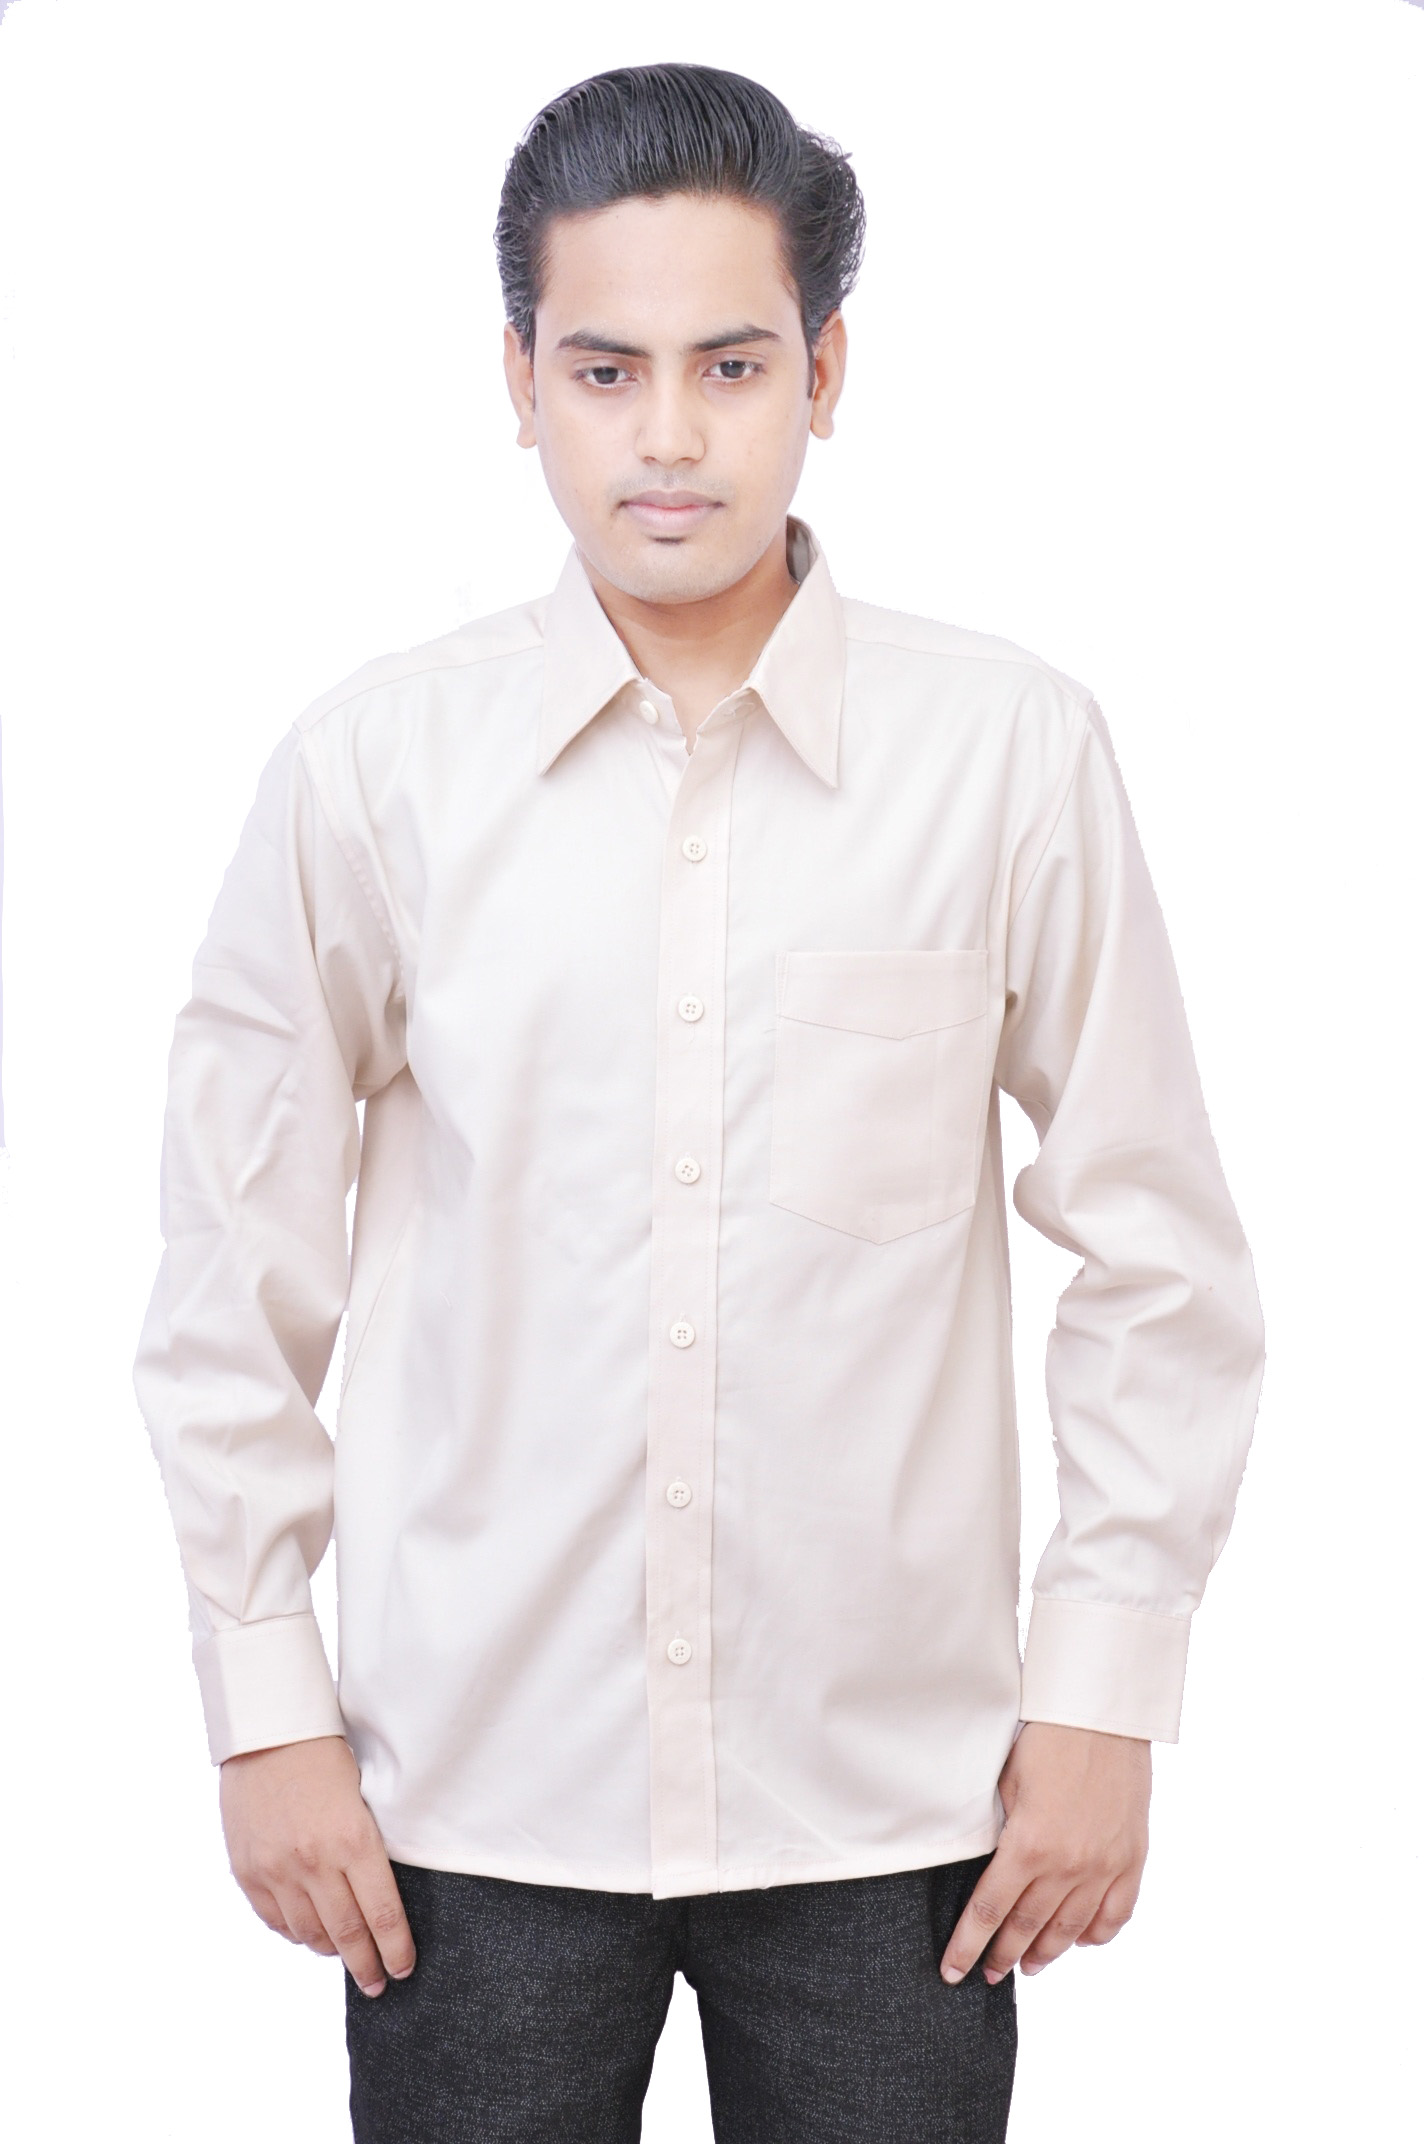 Buy Cotton Cream Plain Formal Shirt By Blue Buton Online - Get 54% Off